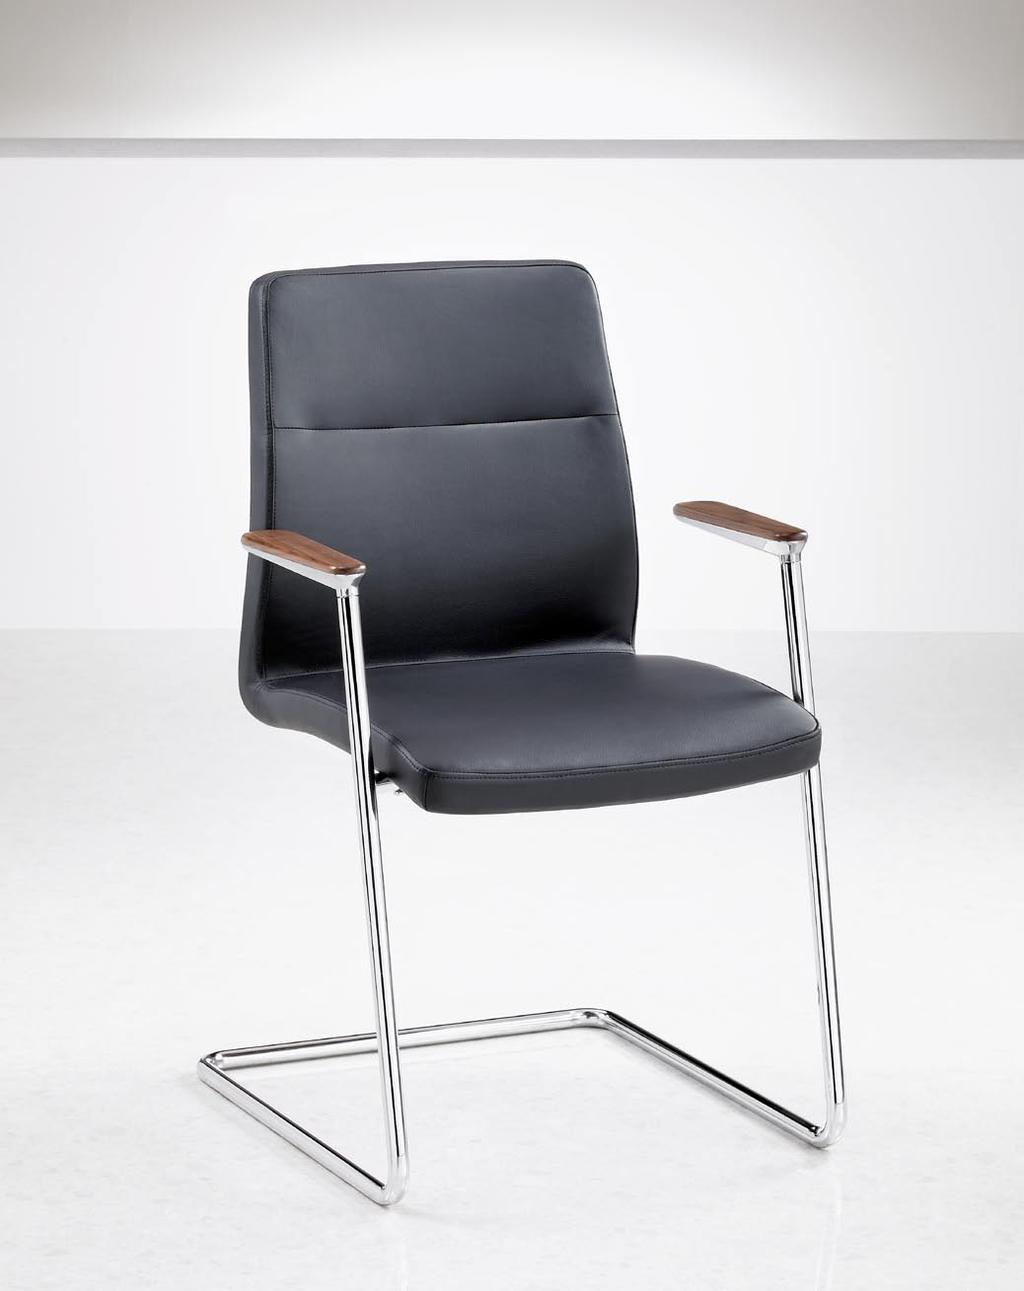 Meeting and Conference Chairs Fulcrum F3 Cantilever Frame The F3 shares the same comfortable shell as the F1, but on a resilient steel cantilever frame that imparts a subtle spring.